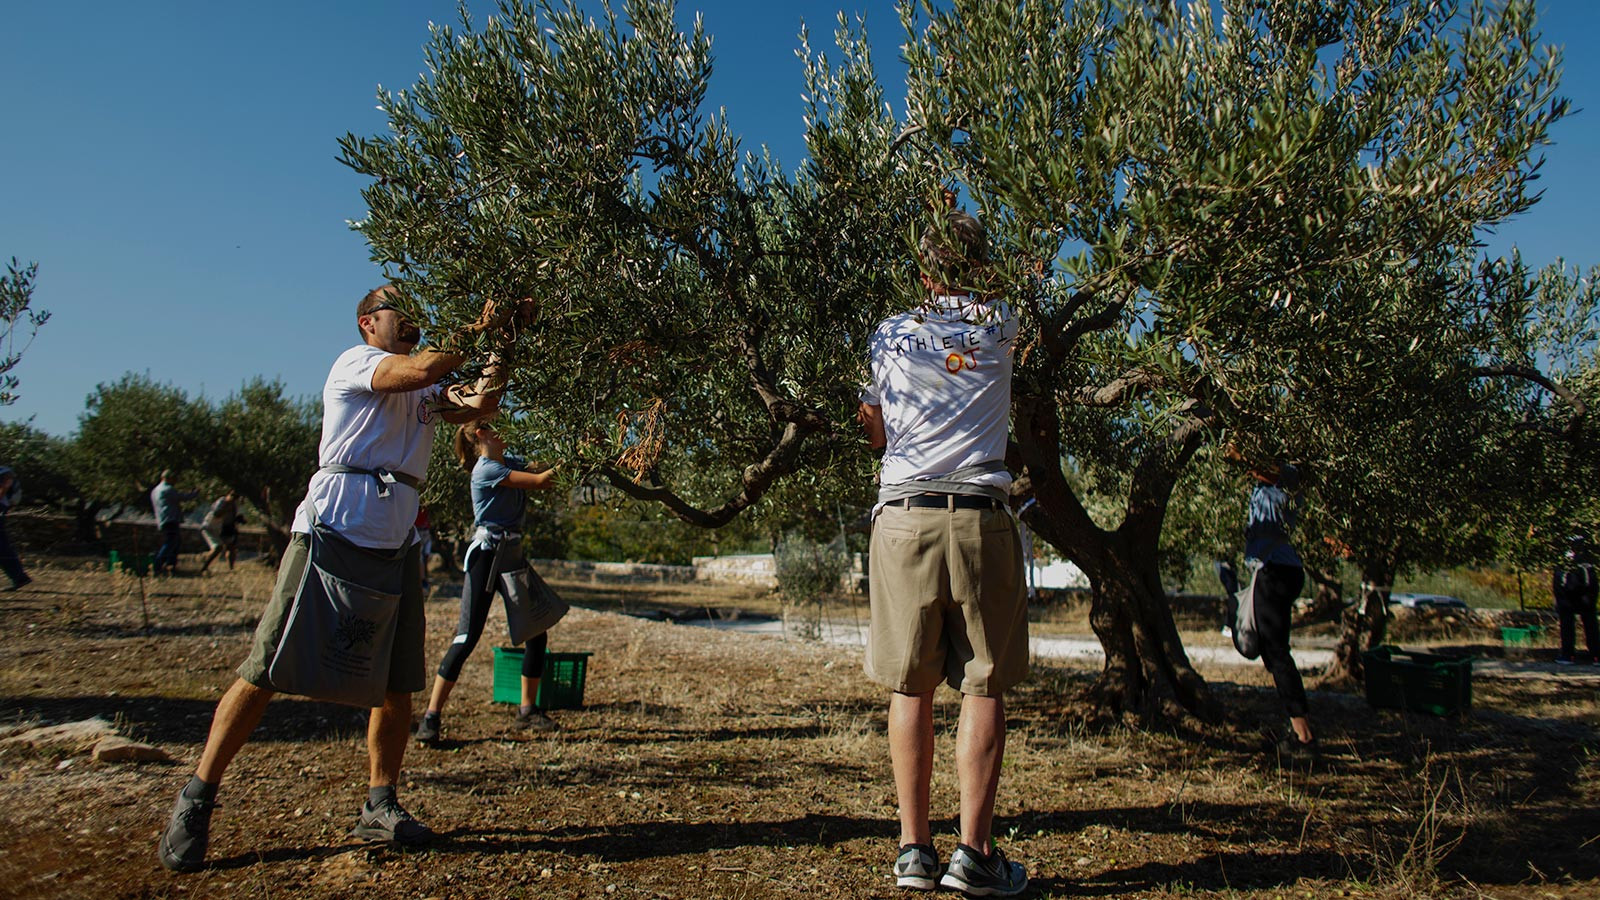 yacht charter on shore activities picking olives